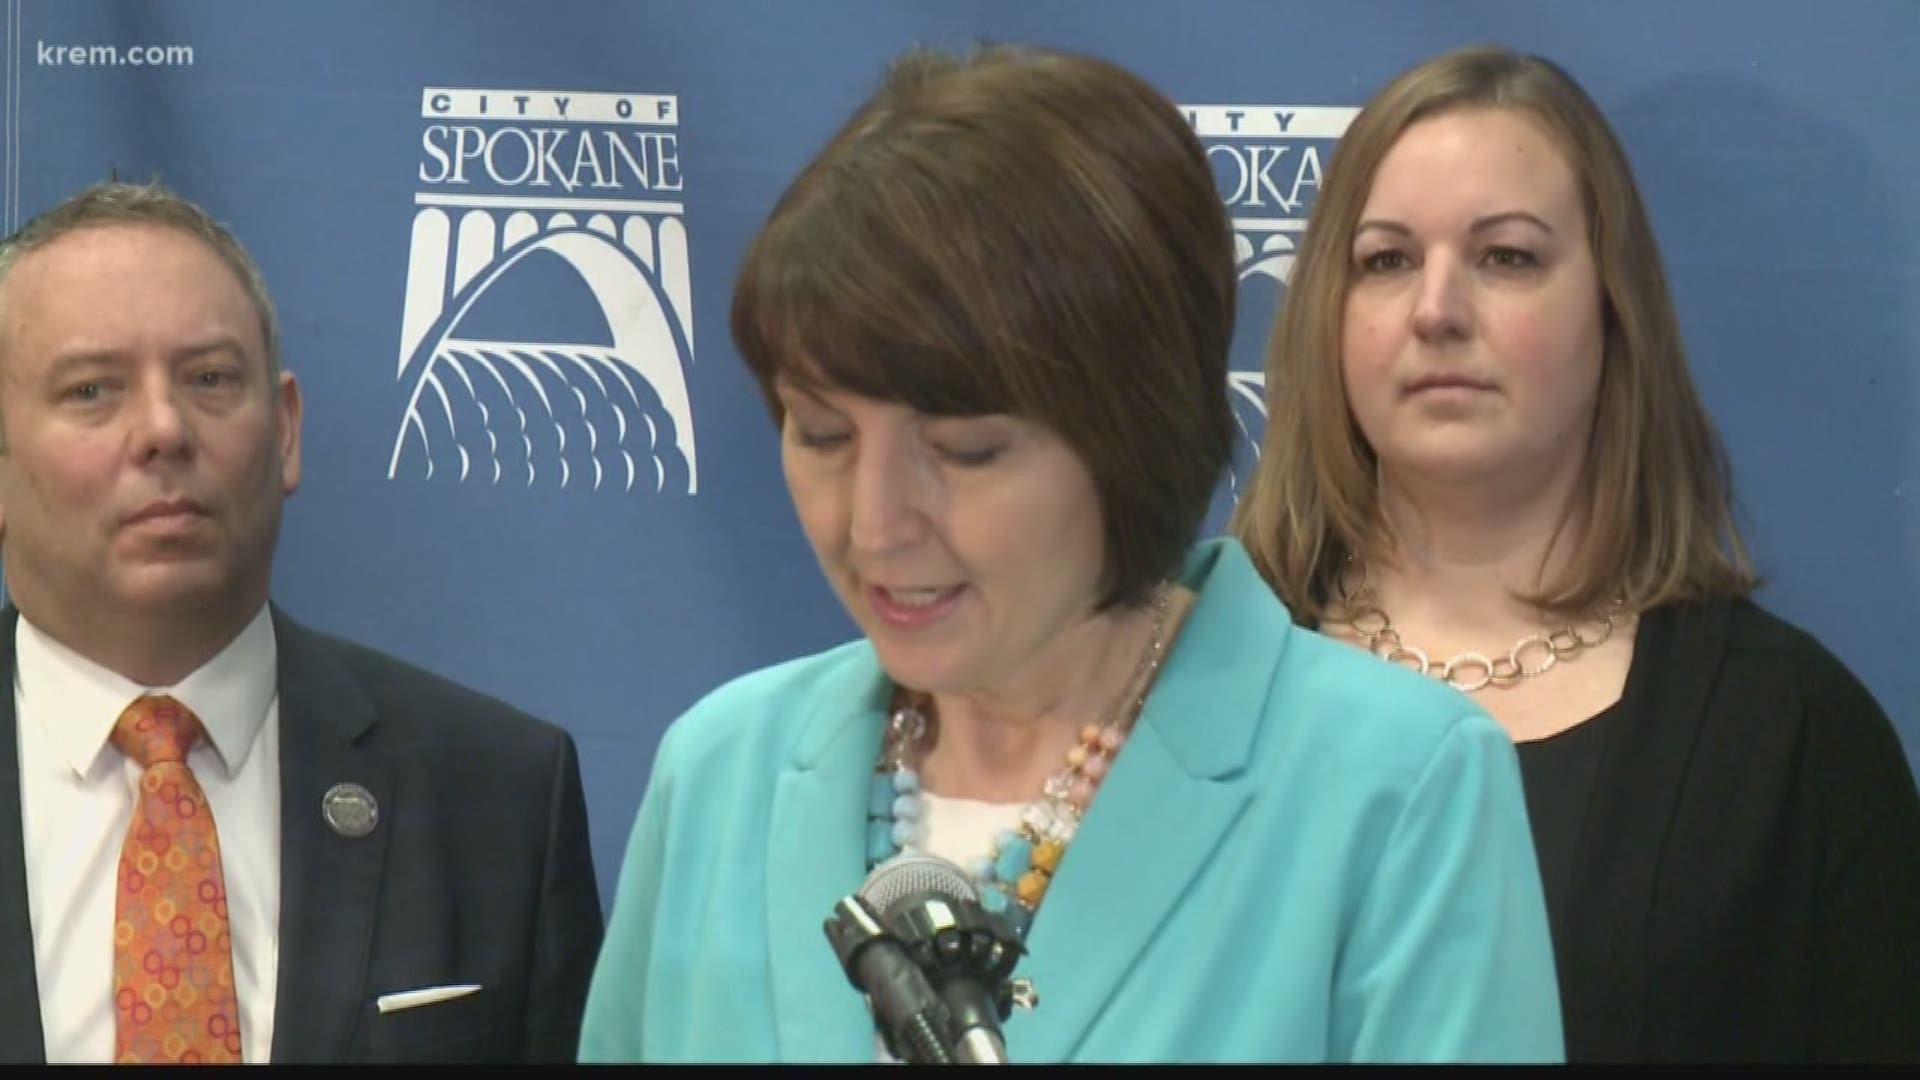 In the midst of that shutdown, some members of Congress aren't in Washington DC right now. That includes Eastern Washington Congresswoman Cathy McMorris Rodgers.